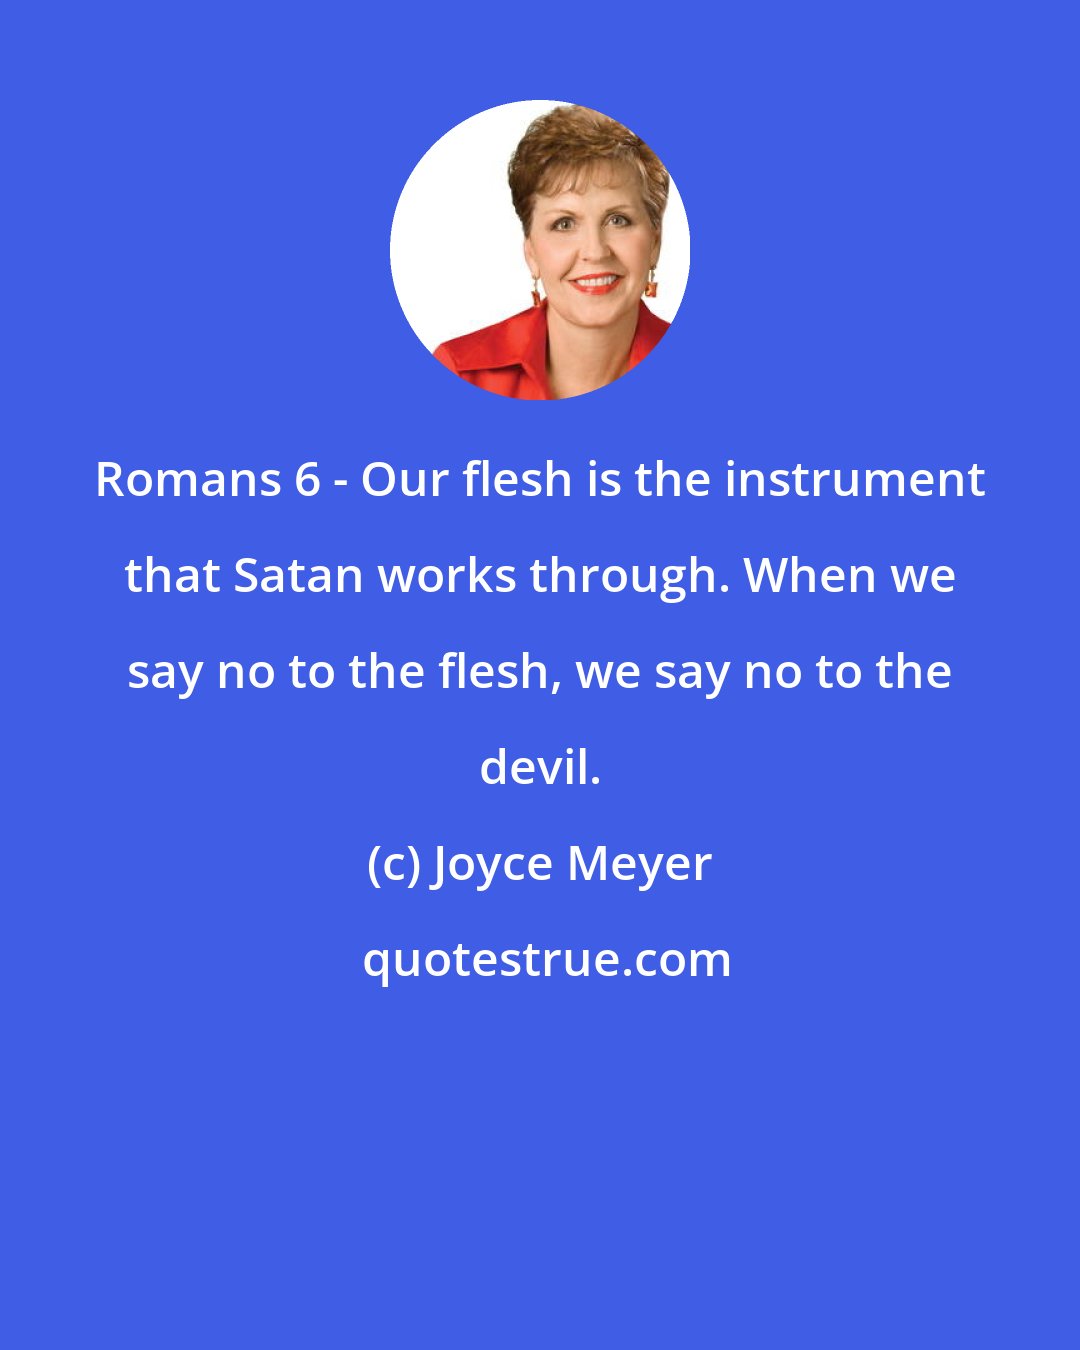 Joyce Meyer: Romans 6 - Our flesh is the instrument that Satan works through. When we say no to the flesh, we say no to the devil.